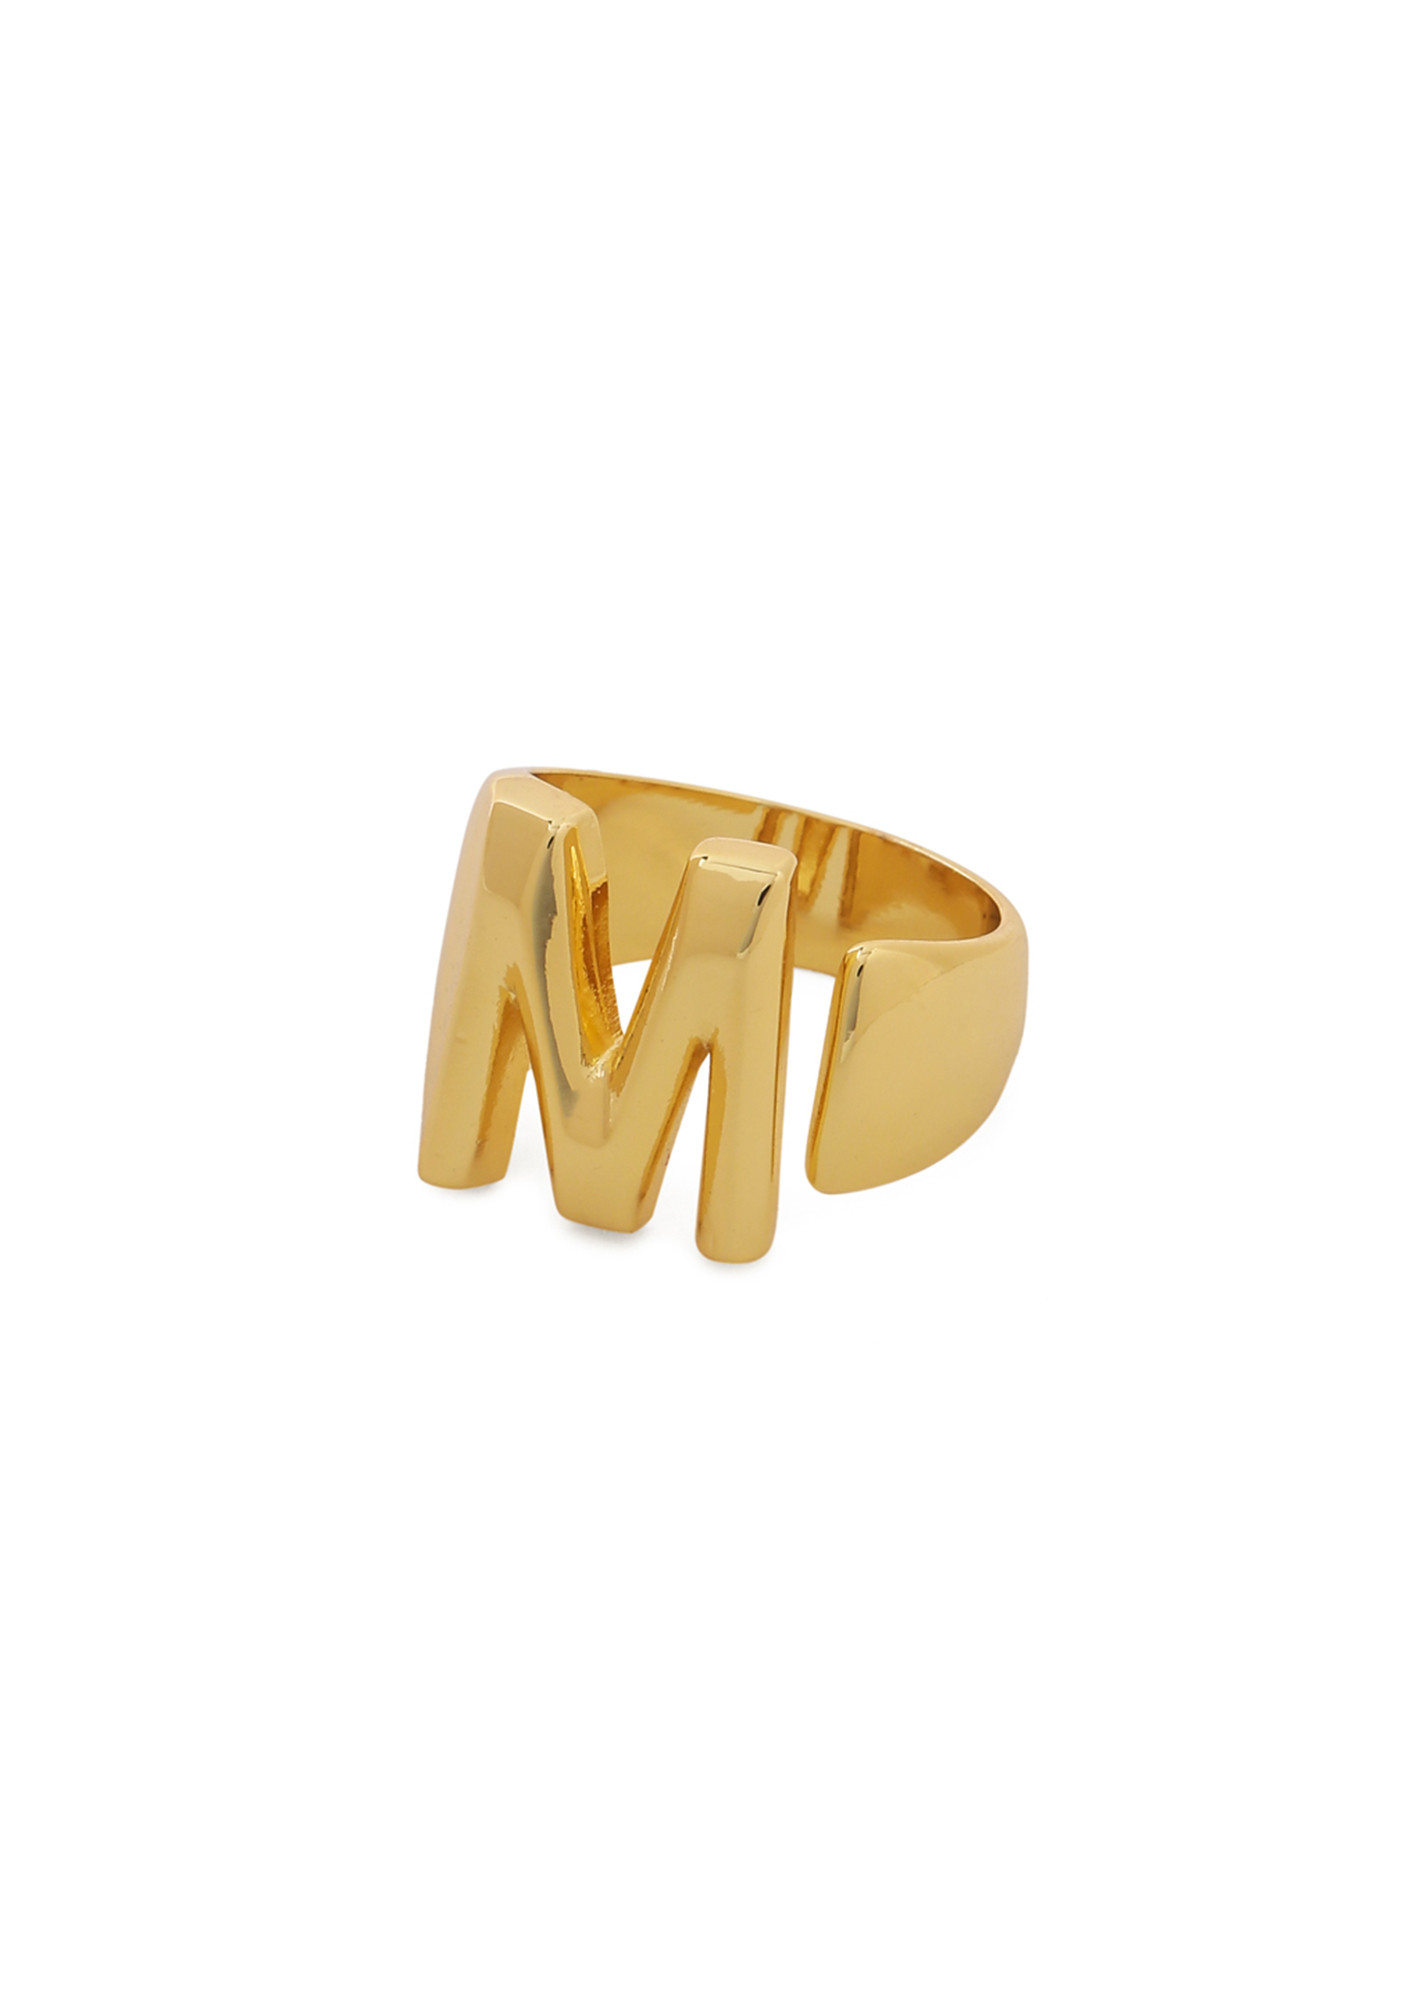 Initial Rnig 'M' Personalized Letter M Ring in 18 Yellow Gold Plated -  China Cubic Zircon Rhodium Plated Rings and Diamond Mini Uppercase Letter  Ring price | Made-in-China.com